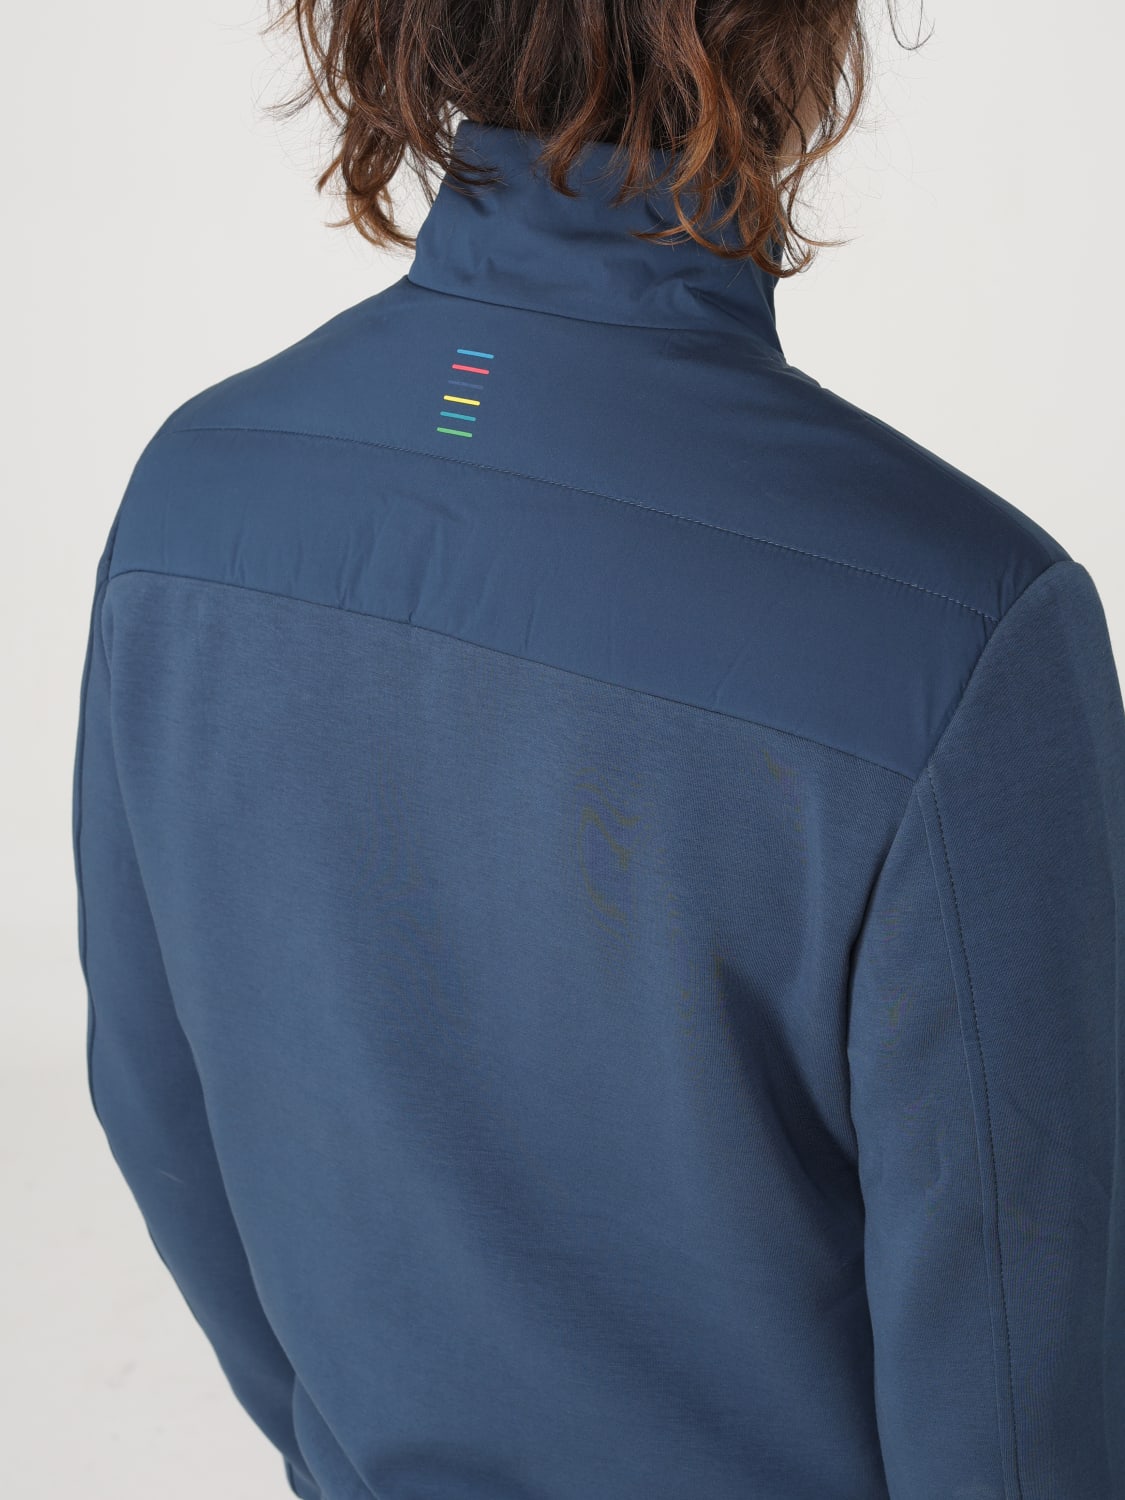 PS PAUL SMITH: jacket for man - Blue | Ps Paul Smith jacket